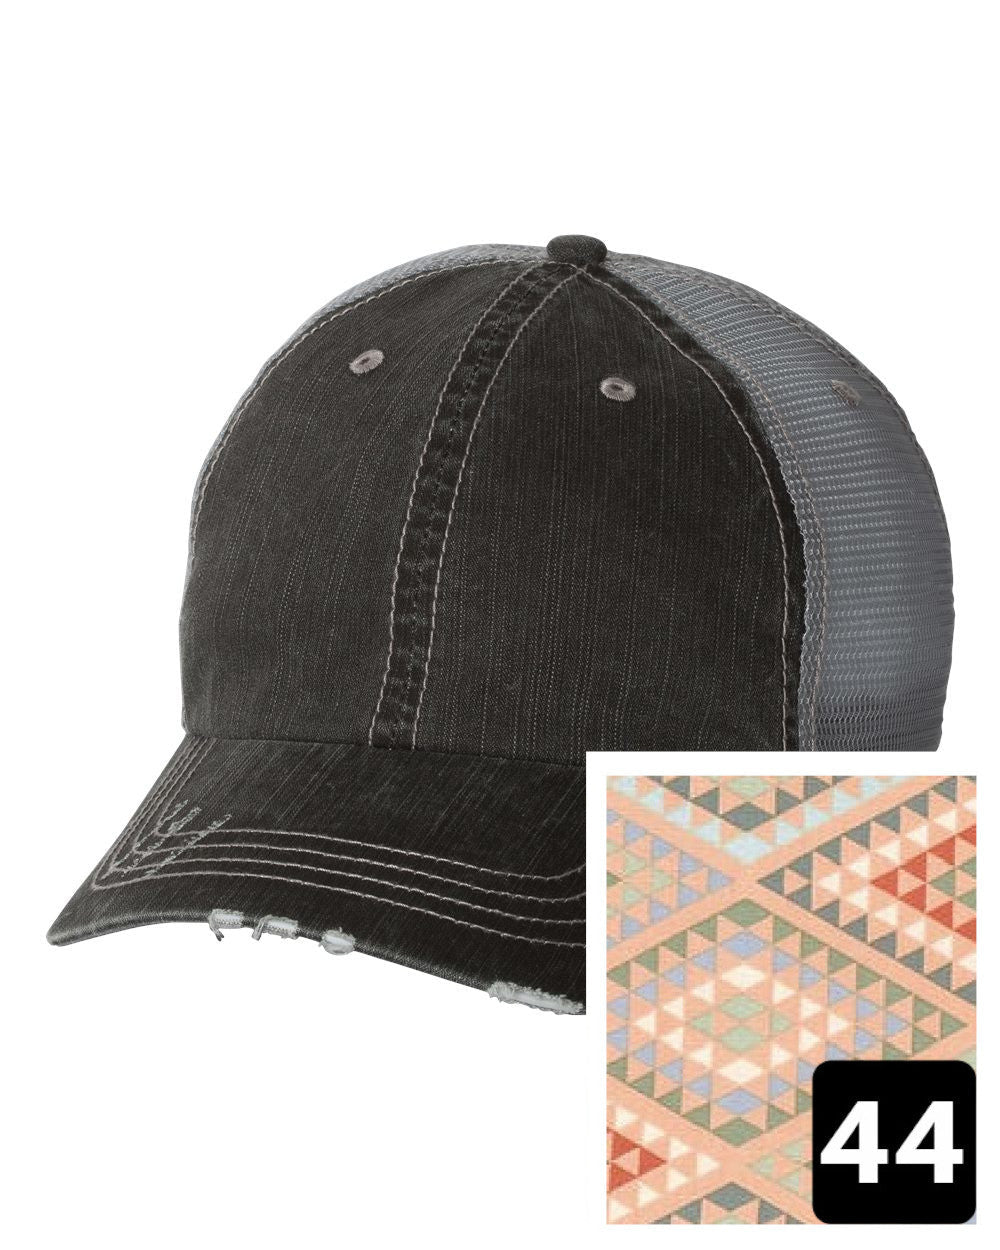 gray distressed trucker hat with navy coral and white chevron fabric state of Michigan